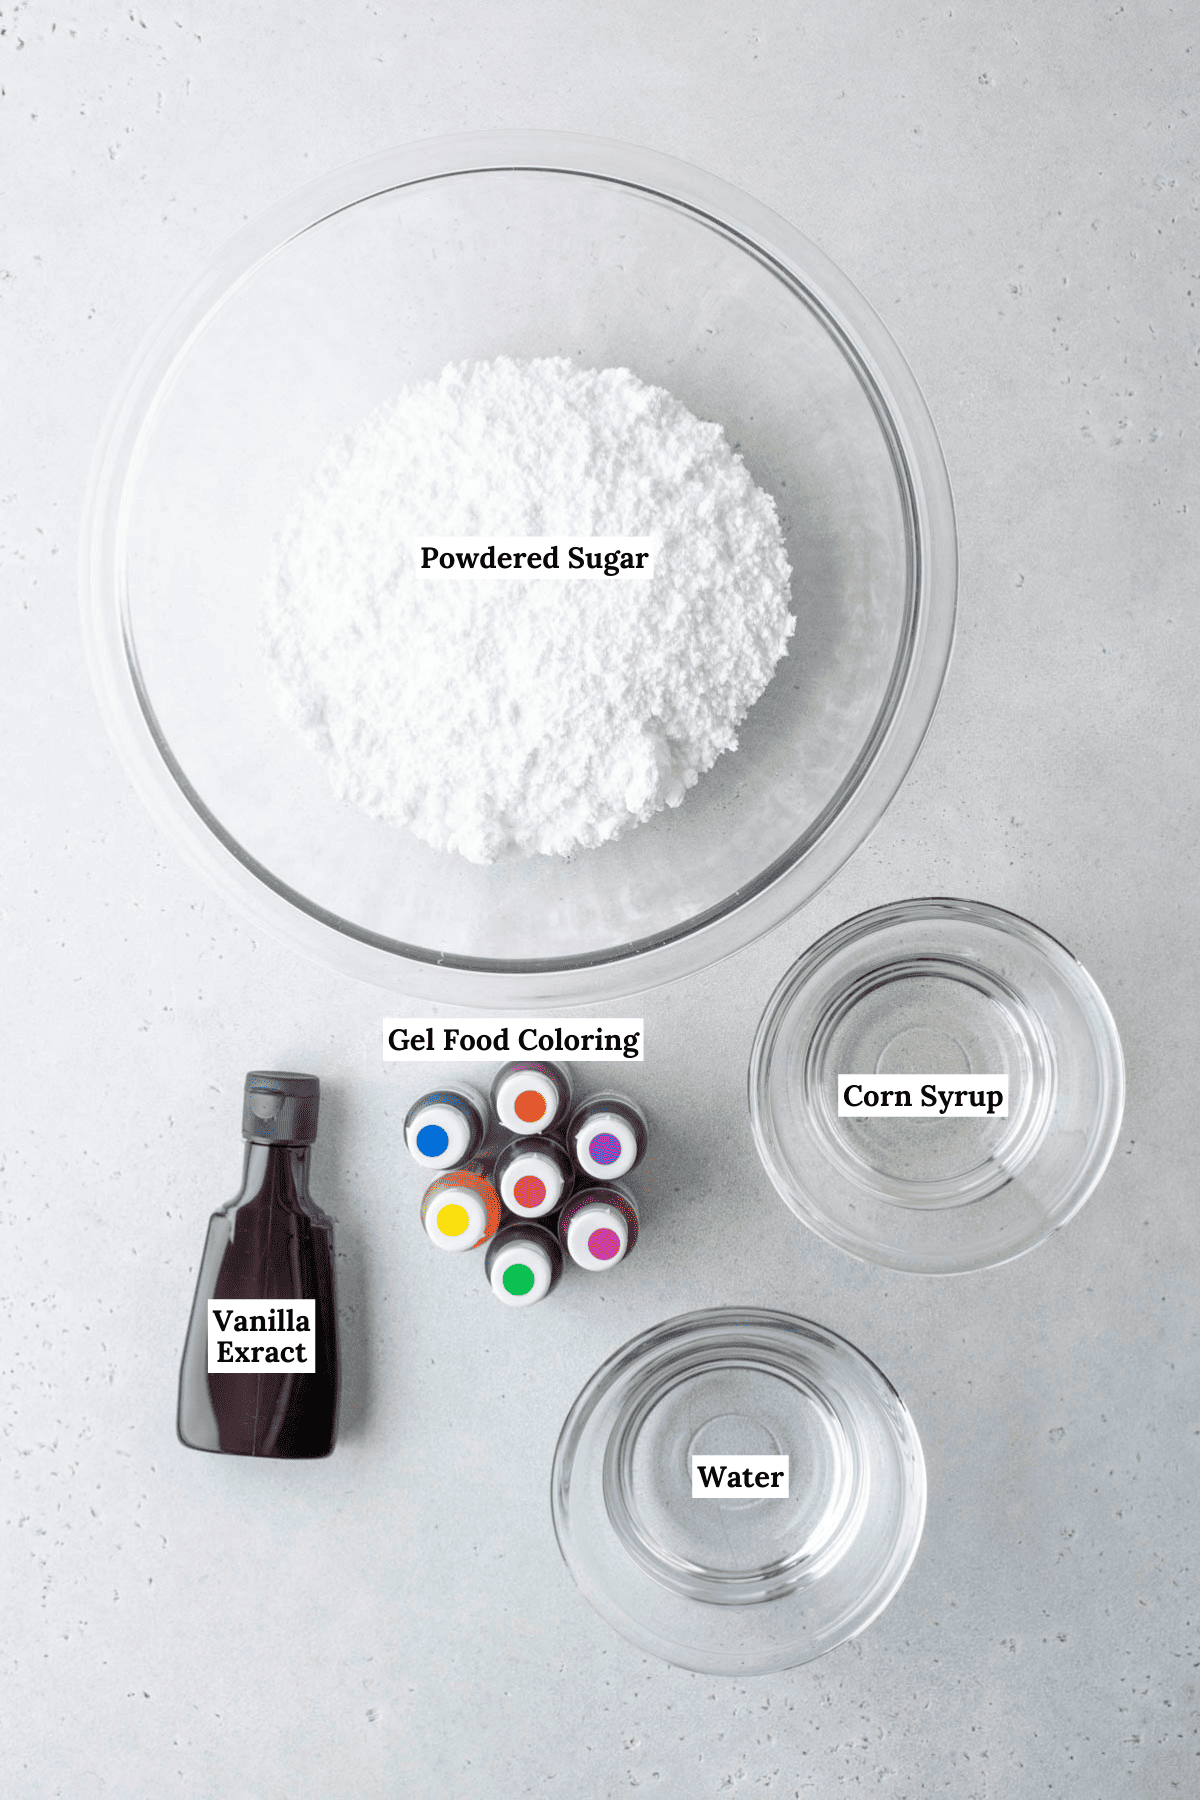 royal icing ingredients including gel food coloring, powdered sugar, corn syrup, water and vanilla extract